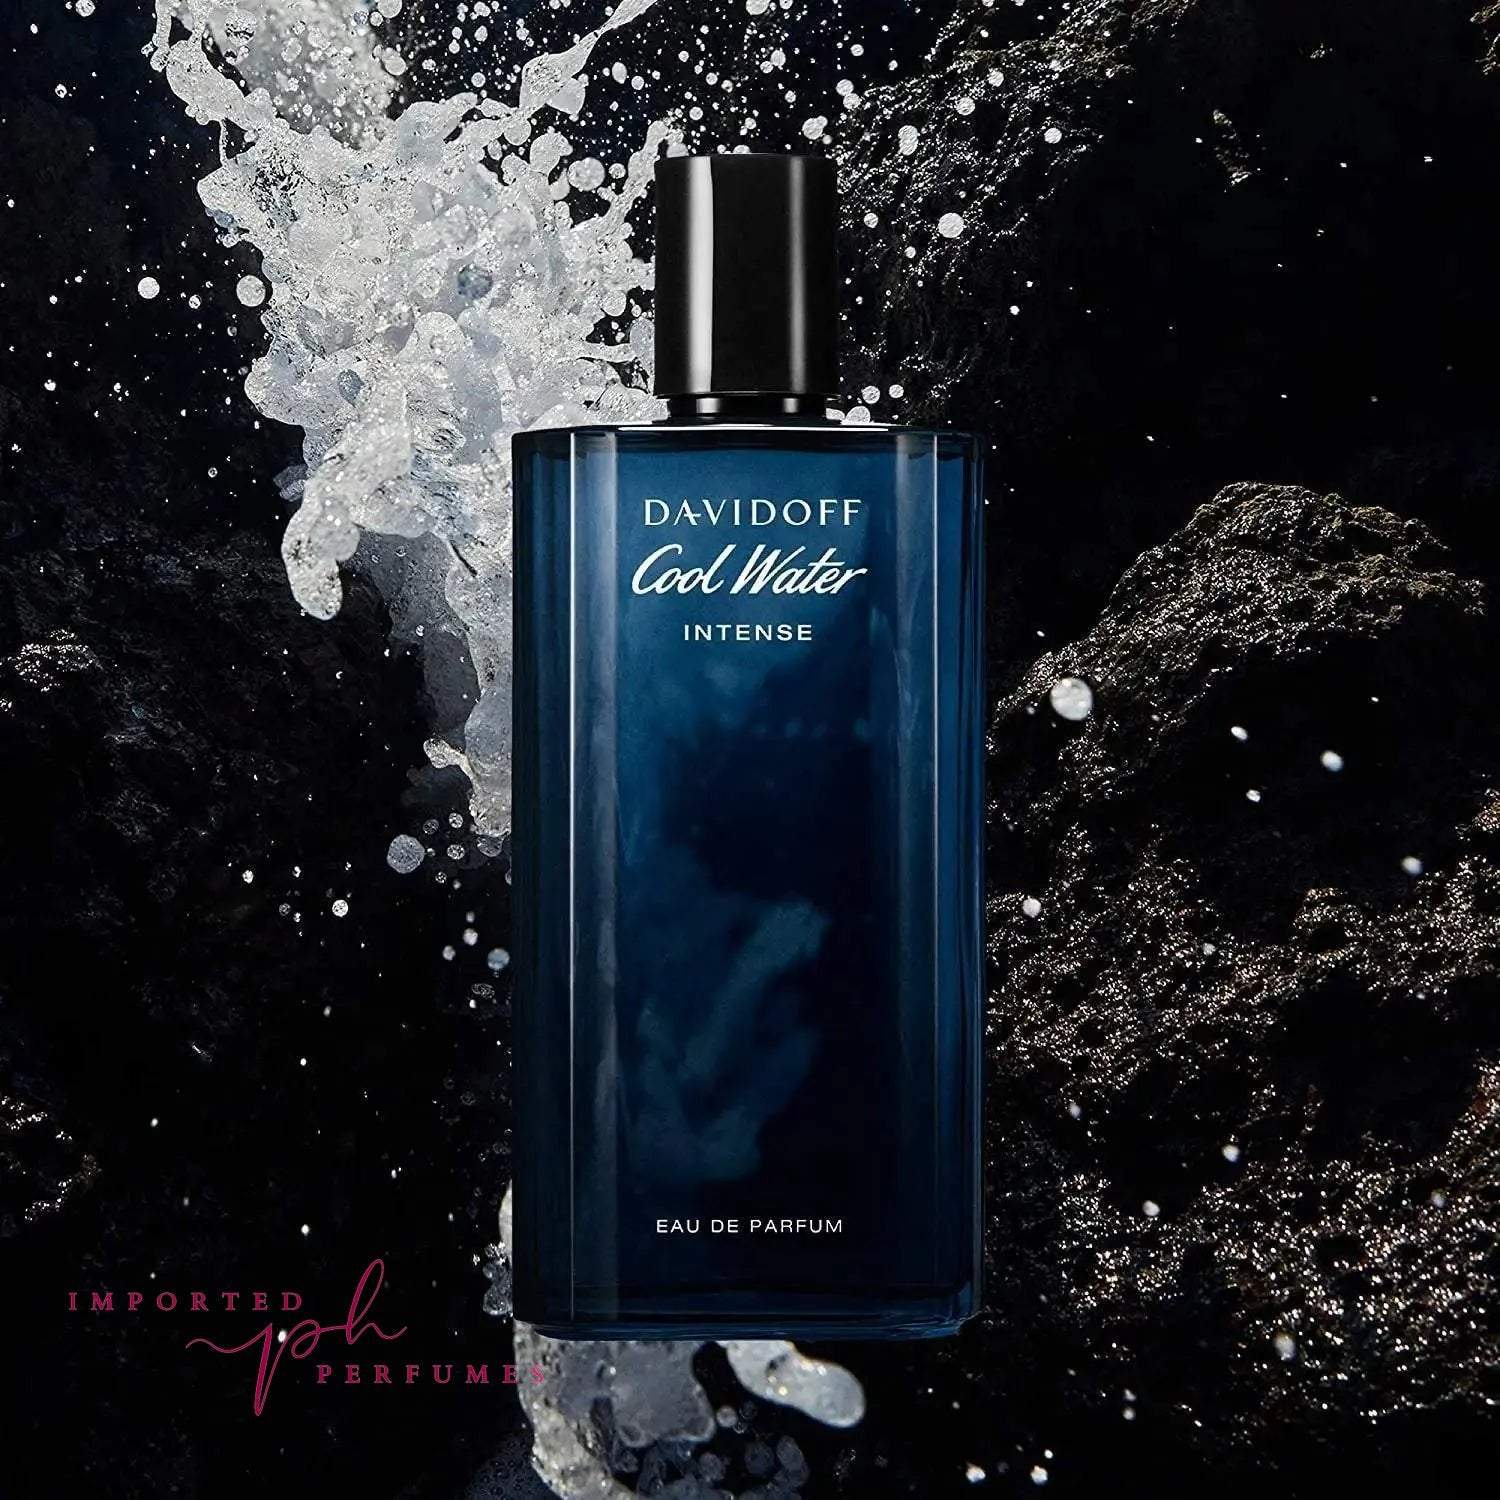 [TESTER] Cool Water Intense by Davidoff for Men Eau de Parfum 125ml-Imported Perfumes Co-cool water intense,Cool water men,david,Davidoff,men,test,TESTER